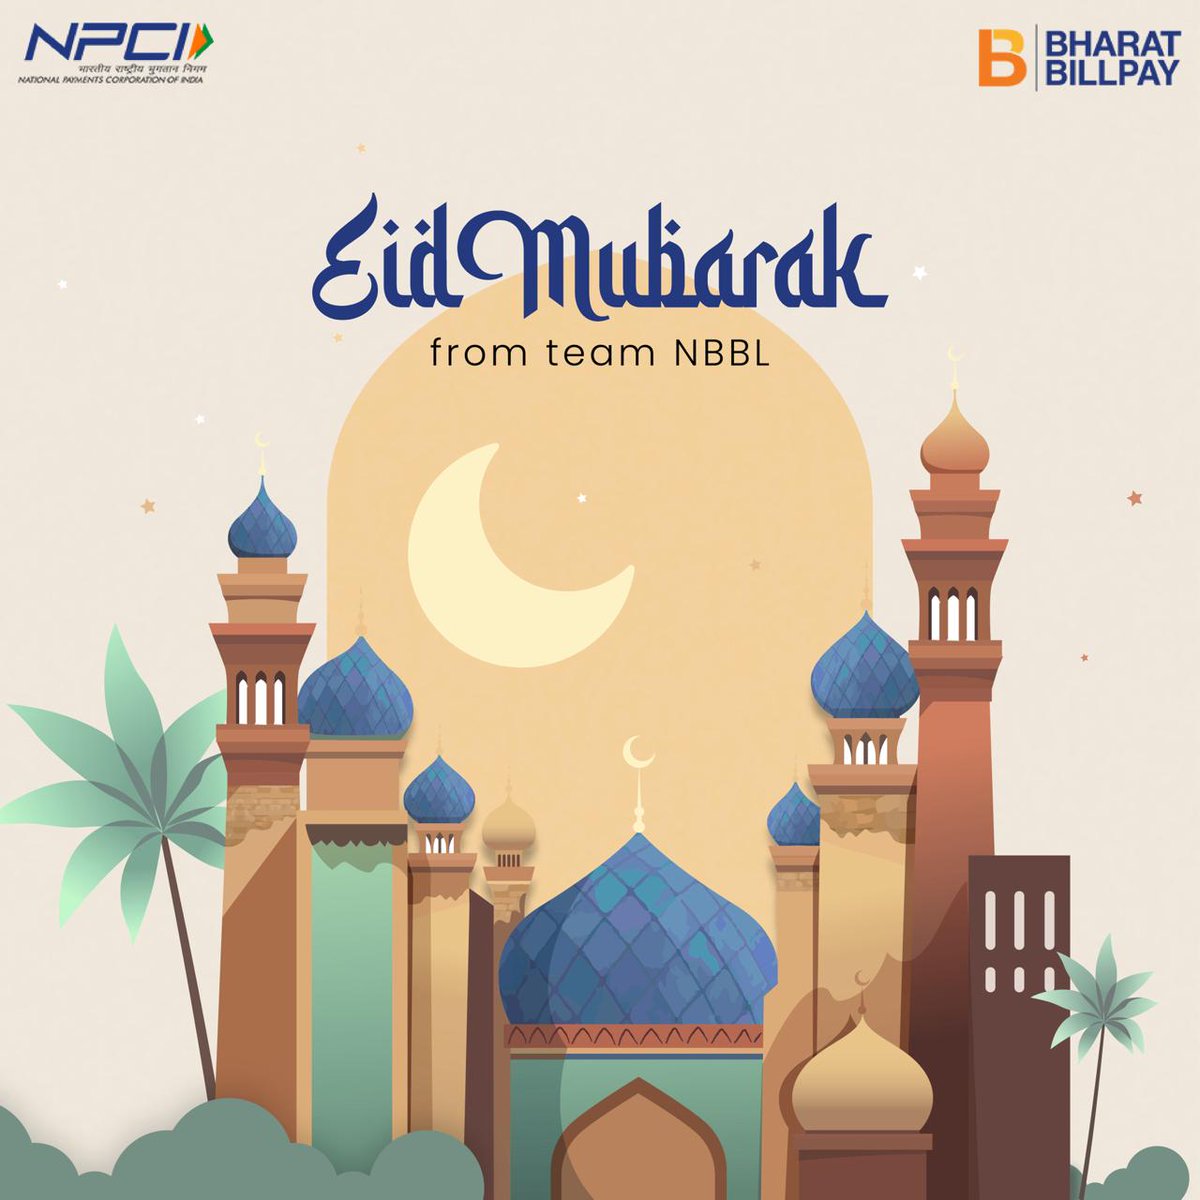 May the spirit of EID fill your hearts with joy and harmony. From all of us at Bharat Billpay #EIDMubarak.